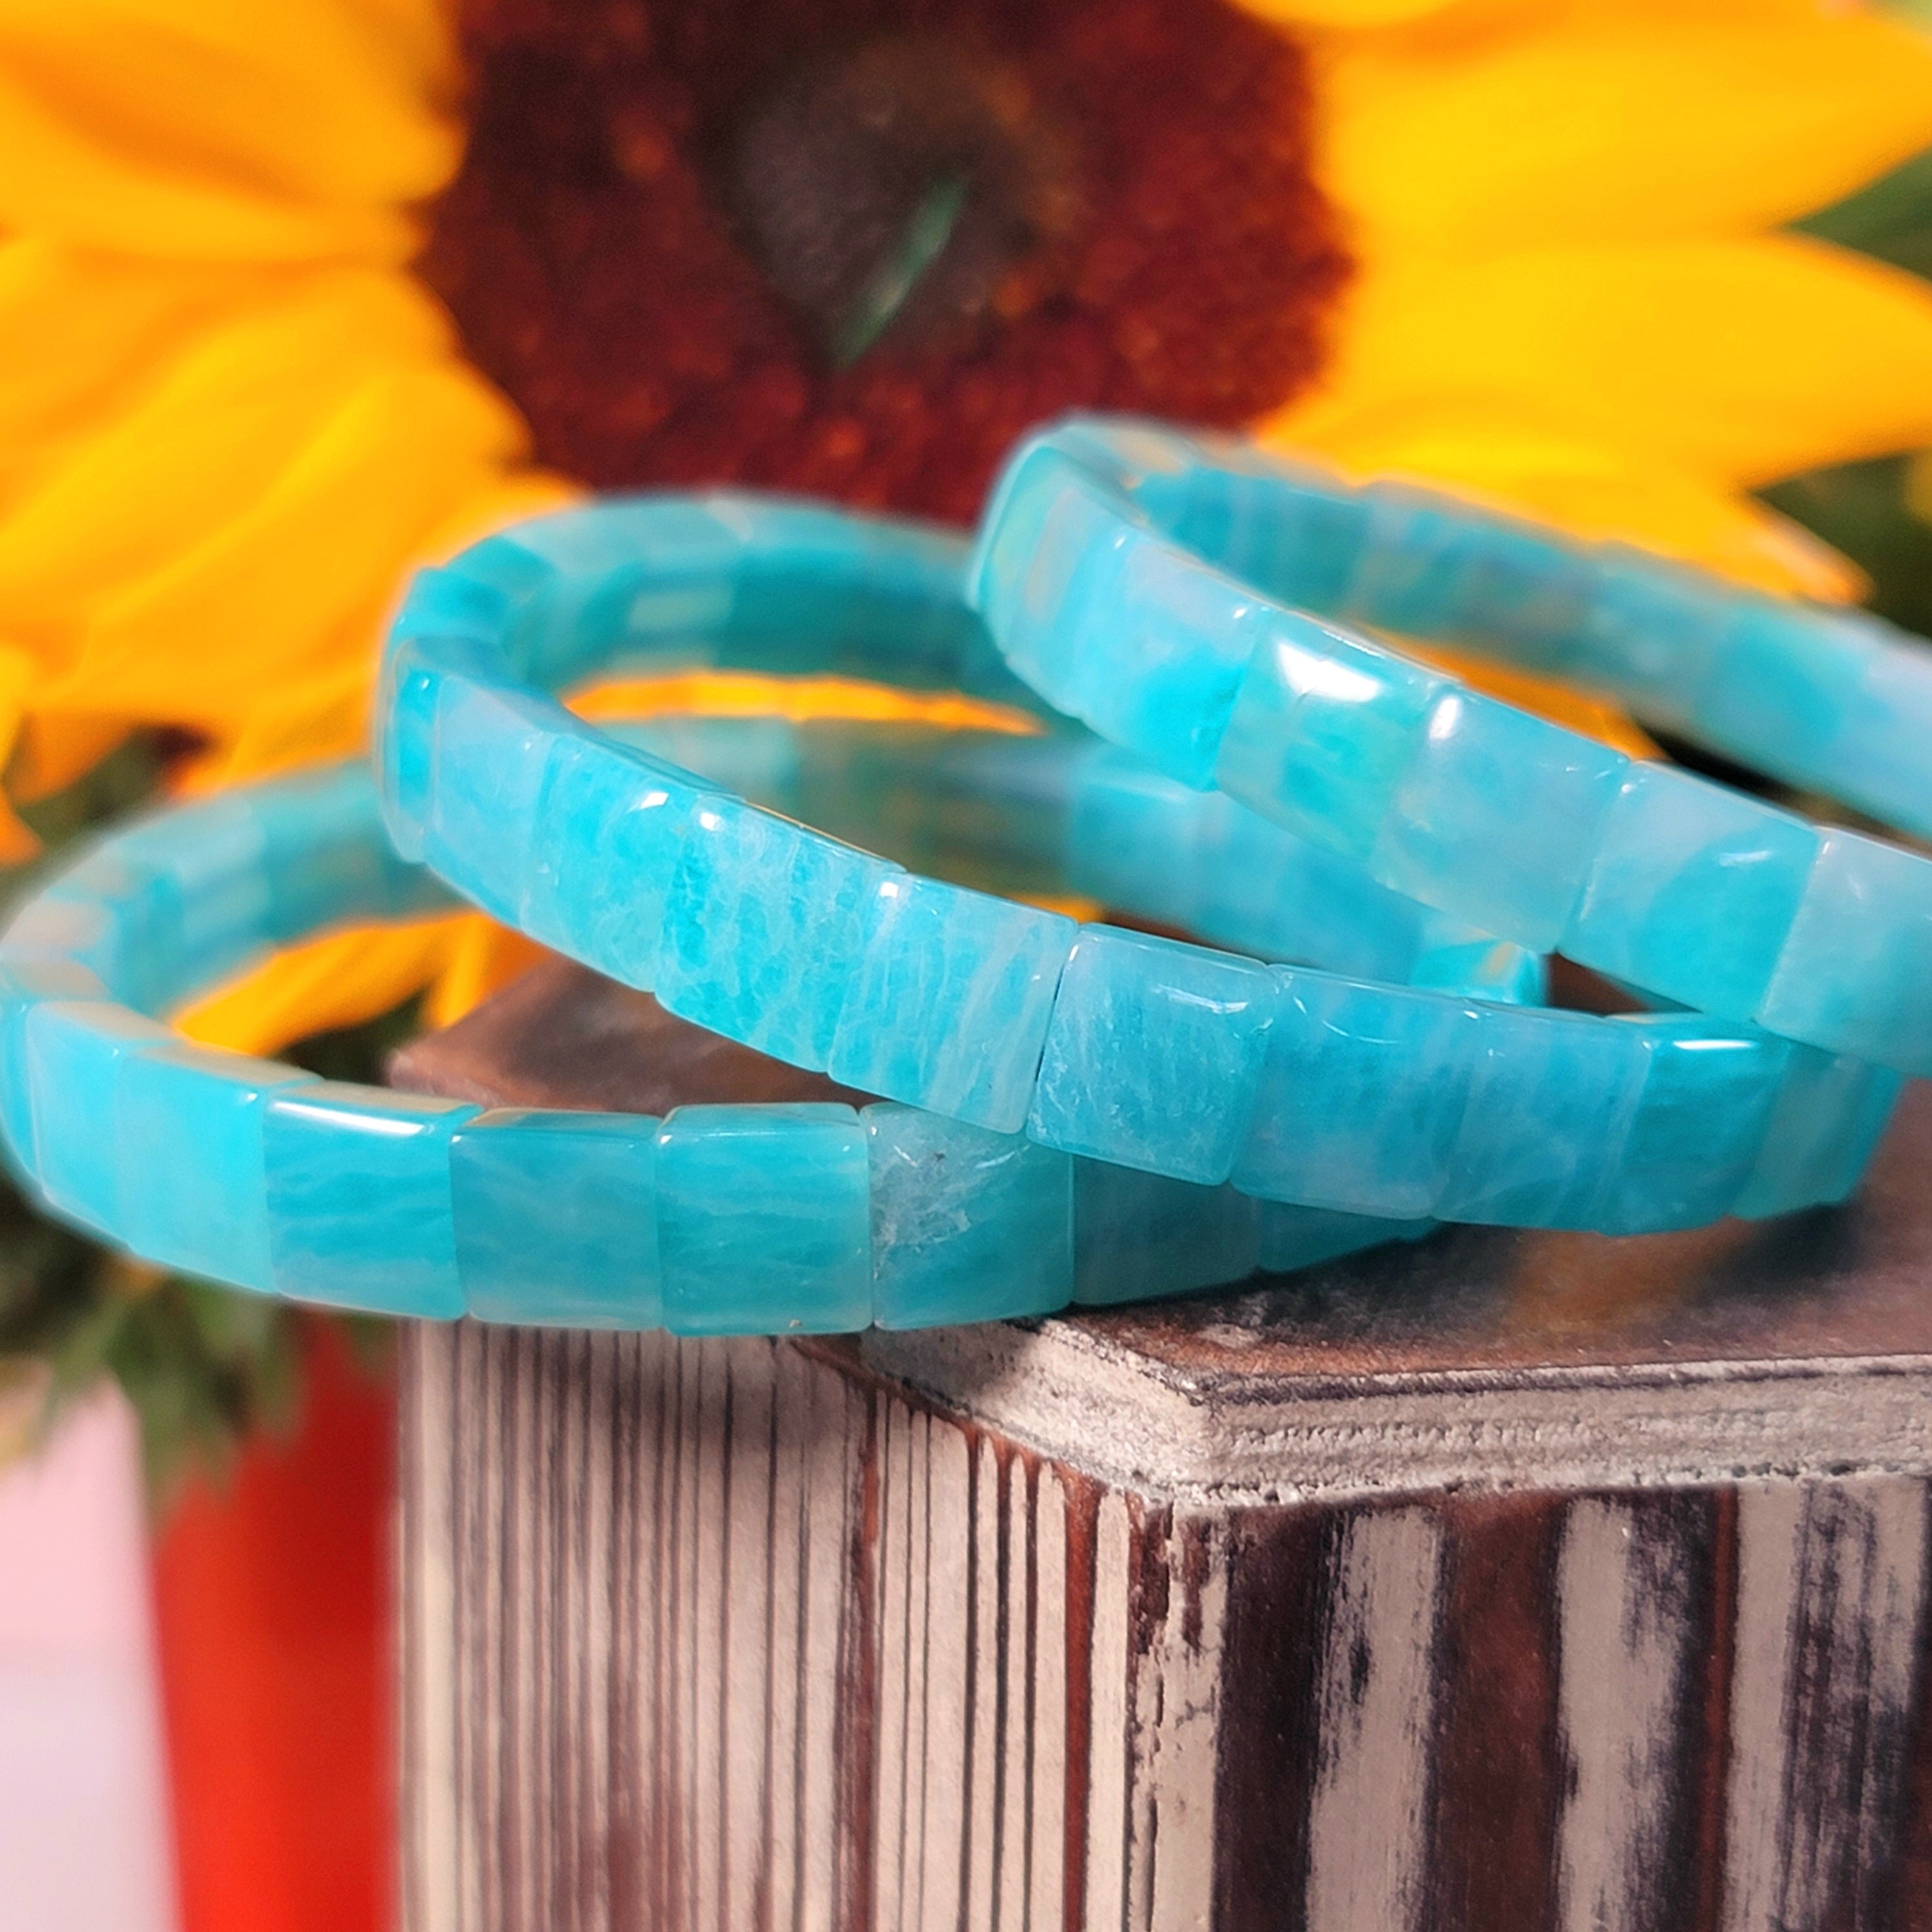 Amazonite Stretchy Bangle Bracelet (High Quality) for Speaking Your Truth